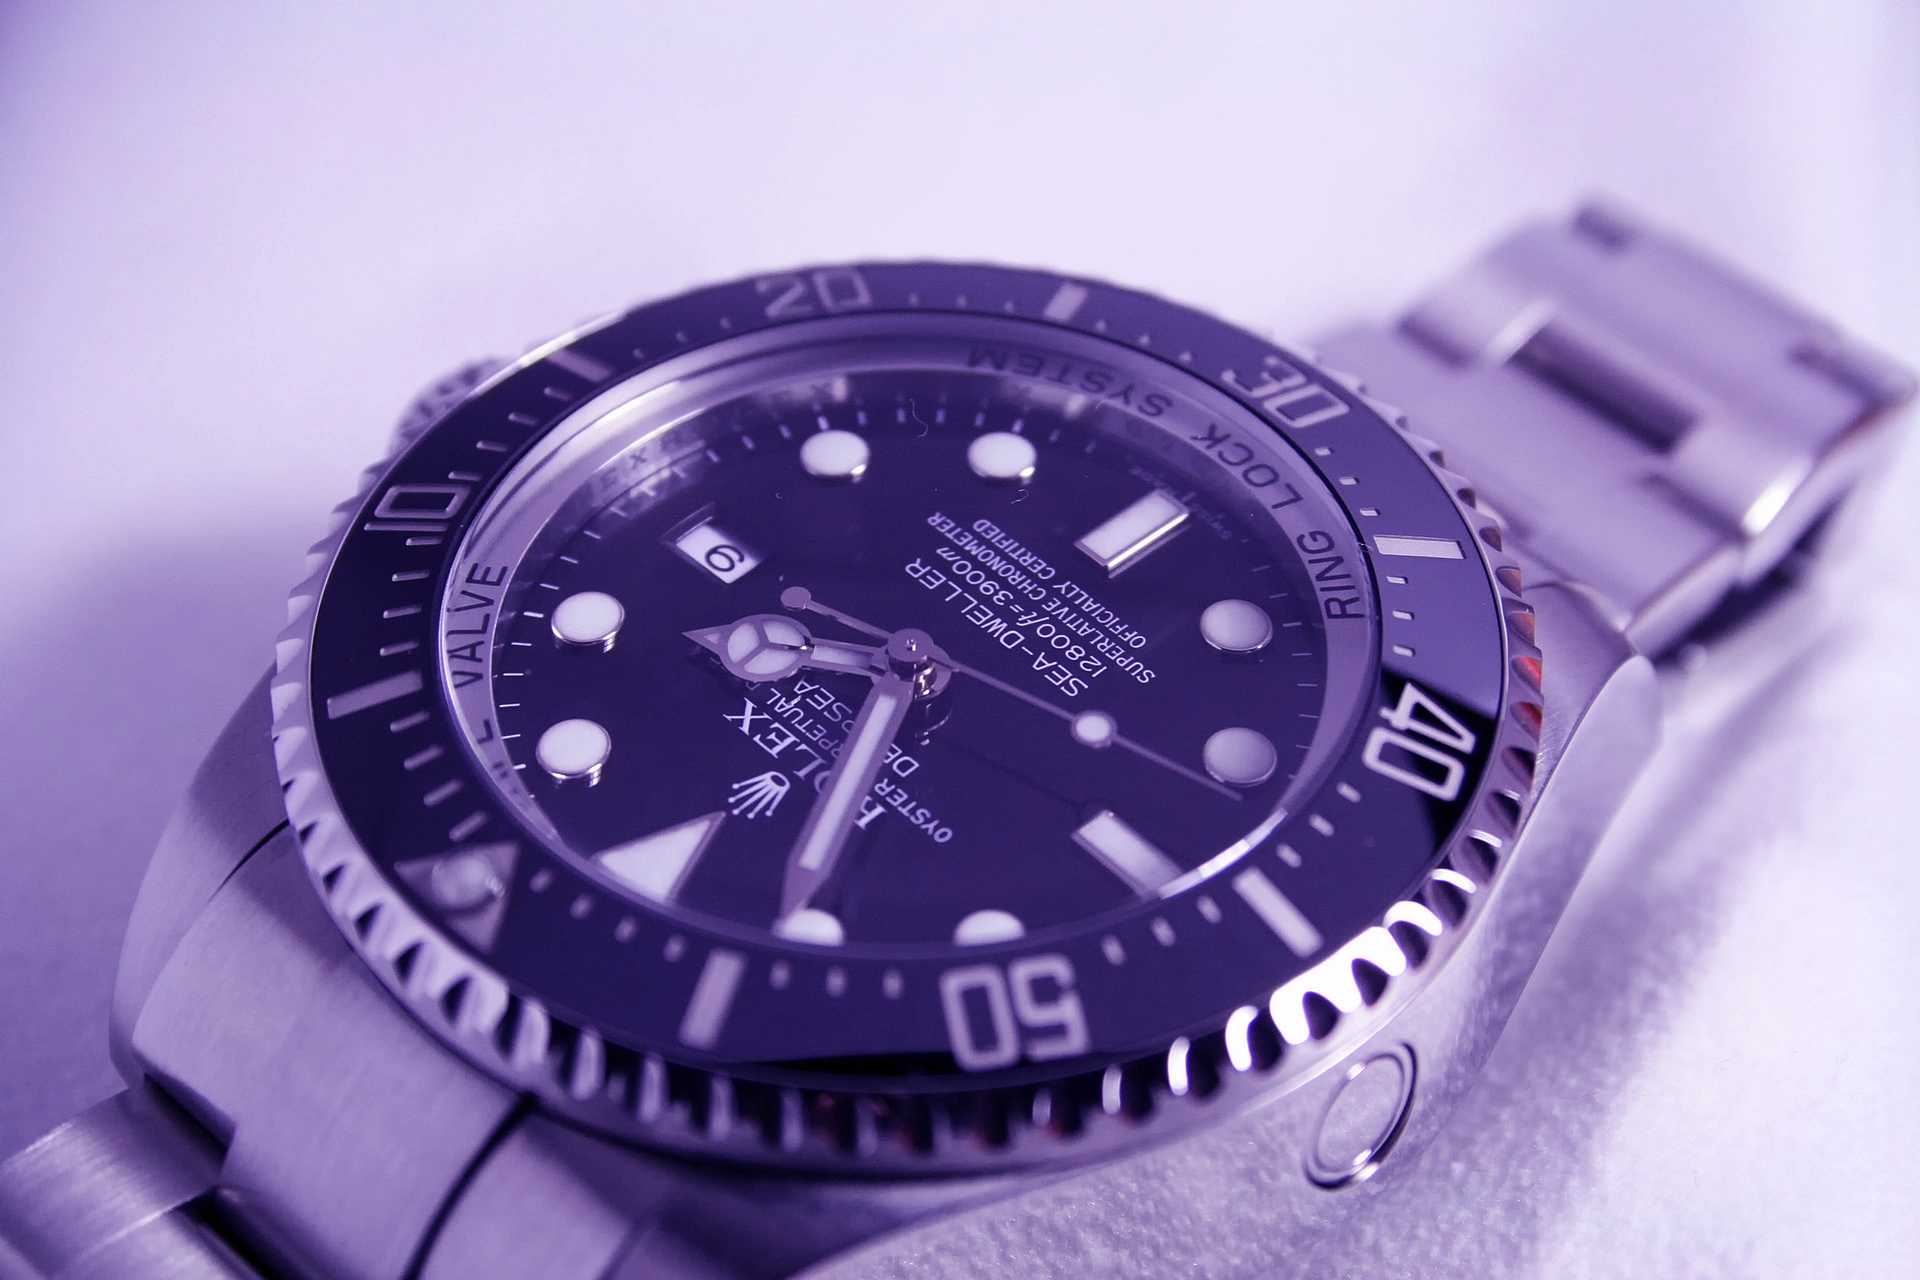 TOP 5 Picks From the New Rolex Men’s Watches